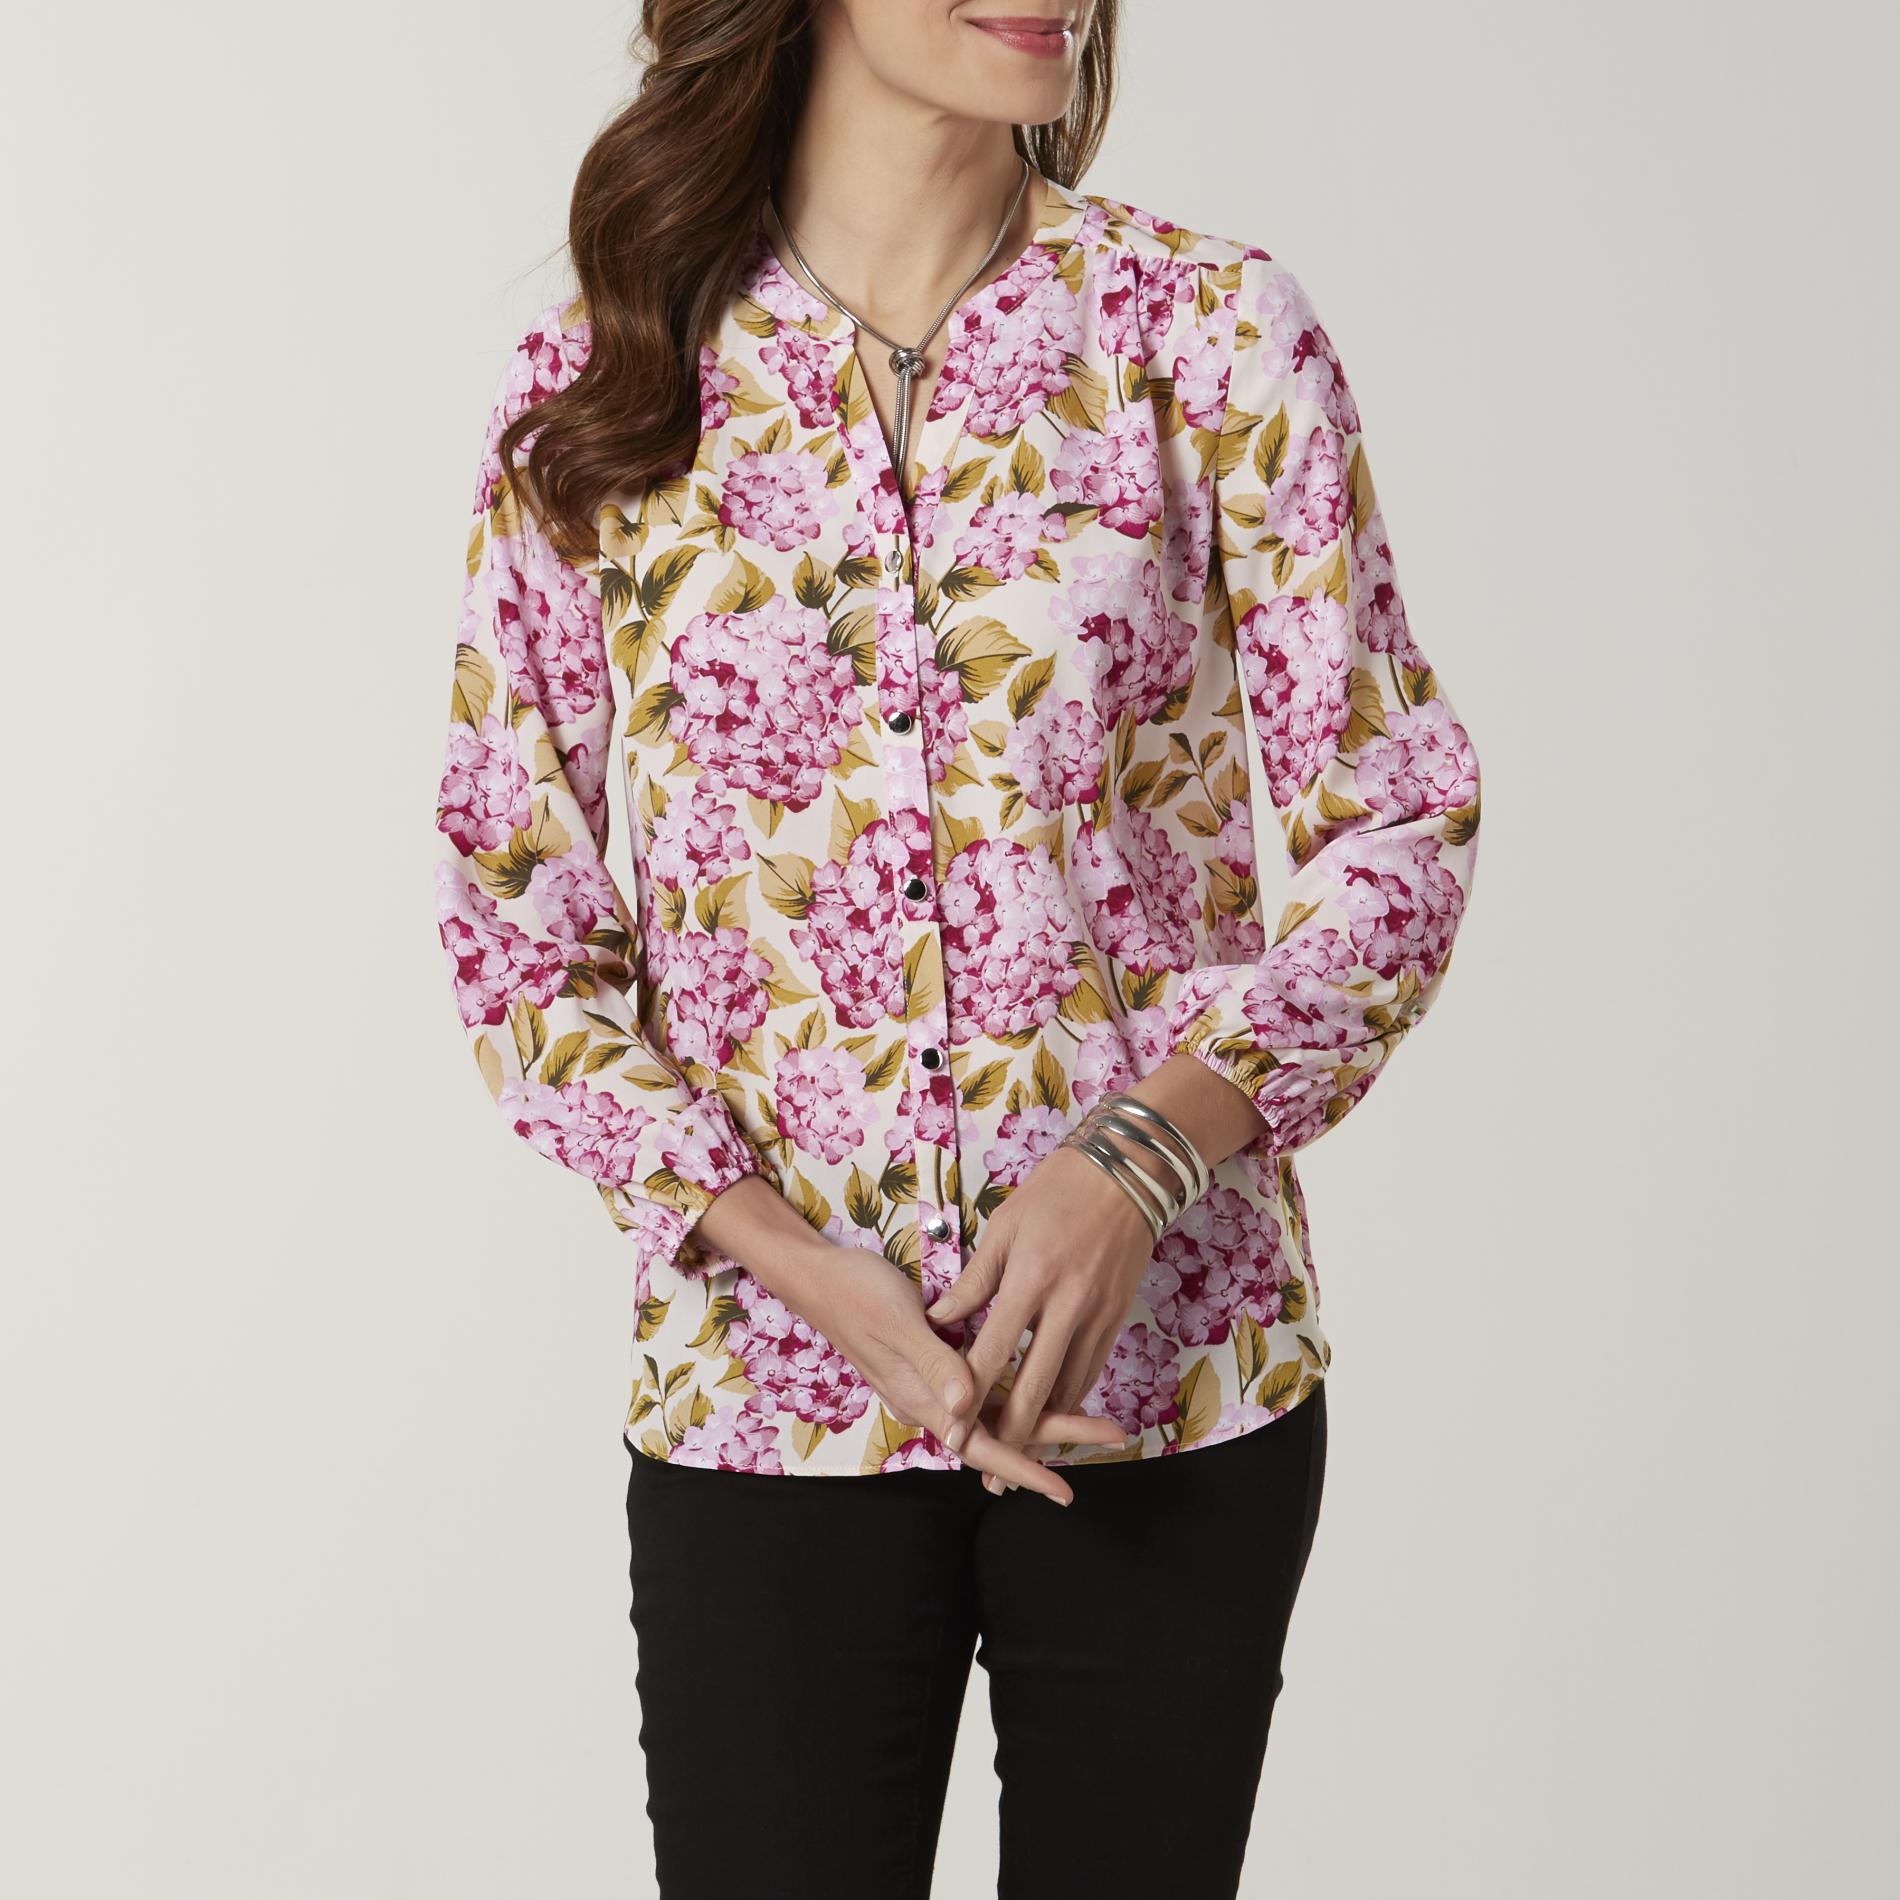 Jaclyn Smith Women's Beth Blouse - Floral